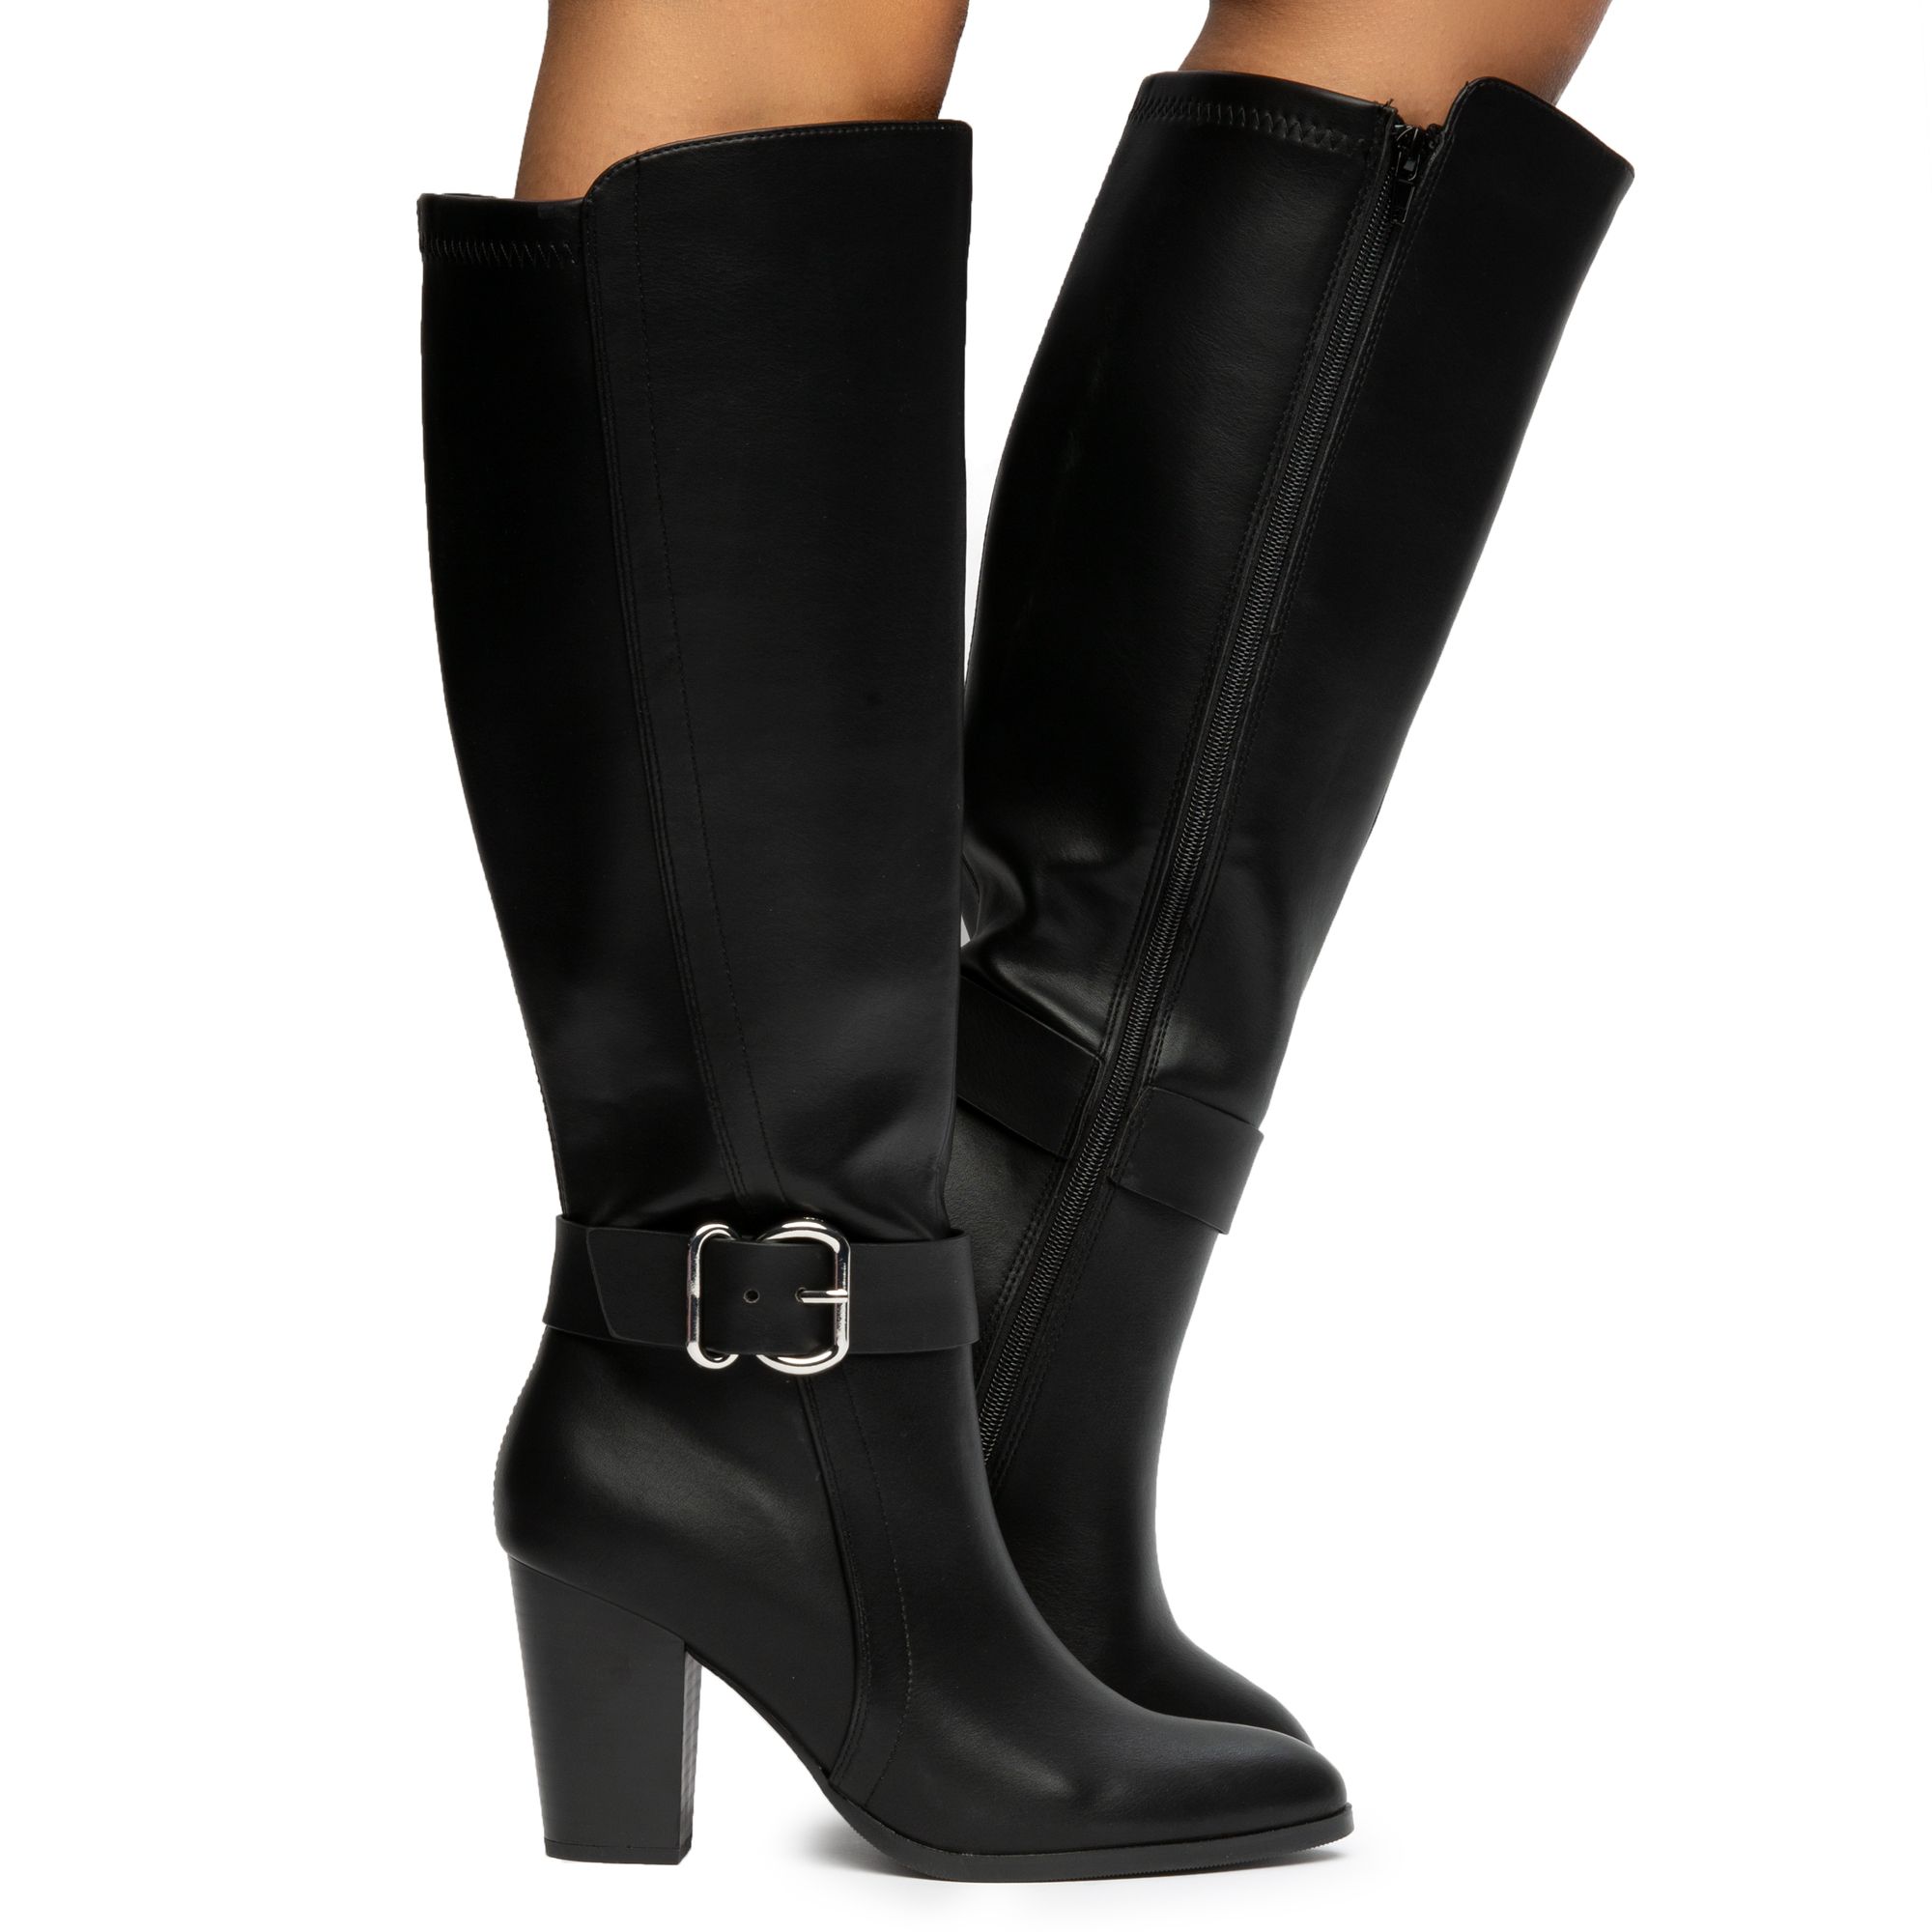 FORTUNE DYNAMICS Spencer-S Mid-Calf Boots FD SPENCER-S-BLK - Shiekh